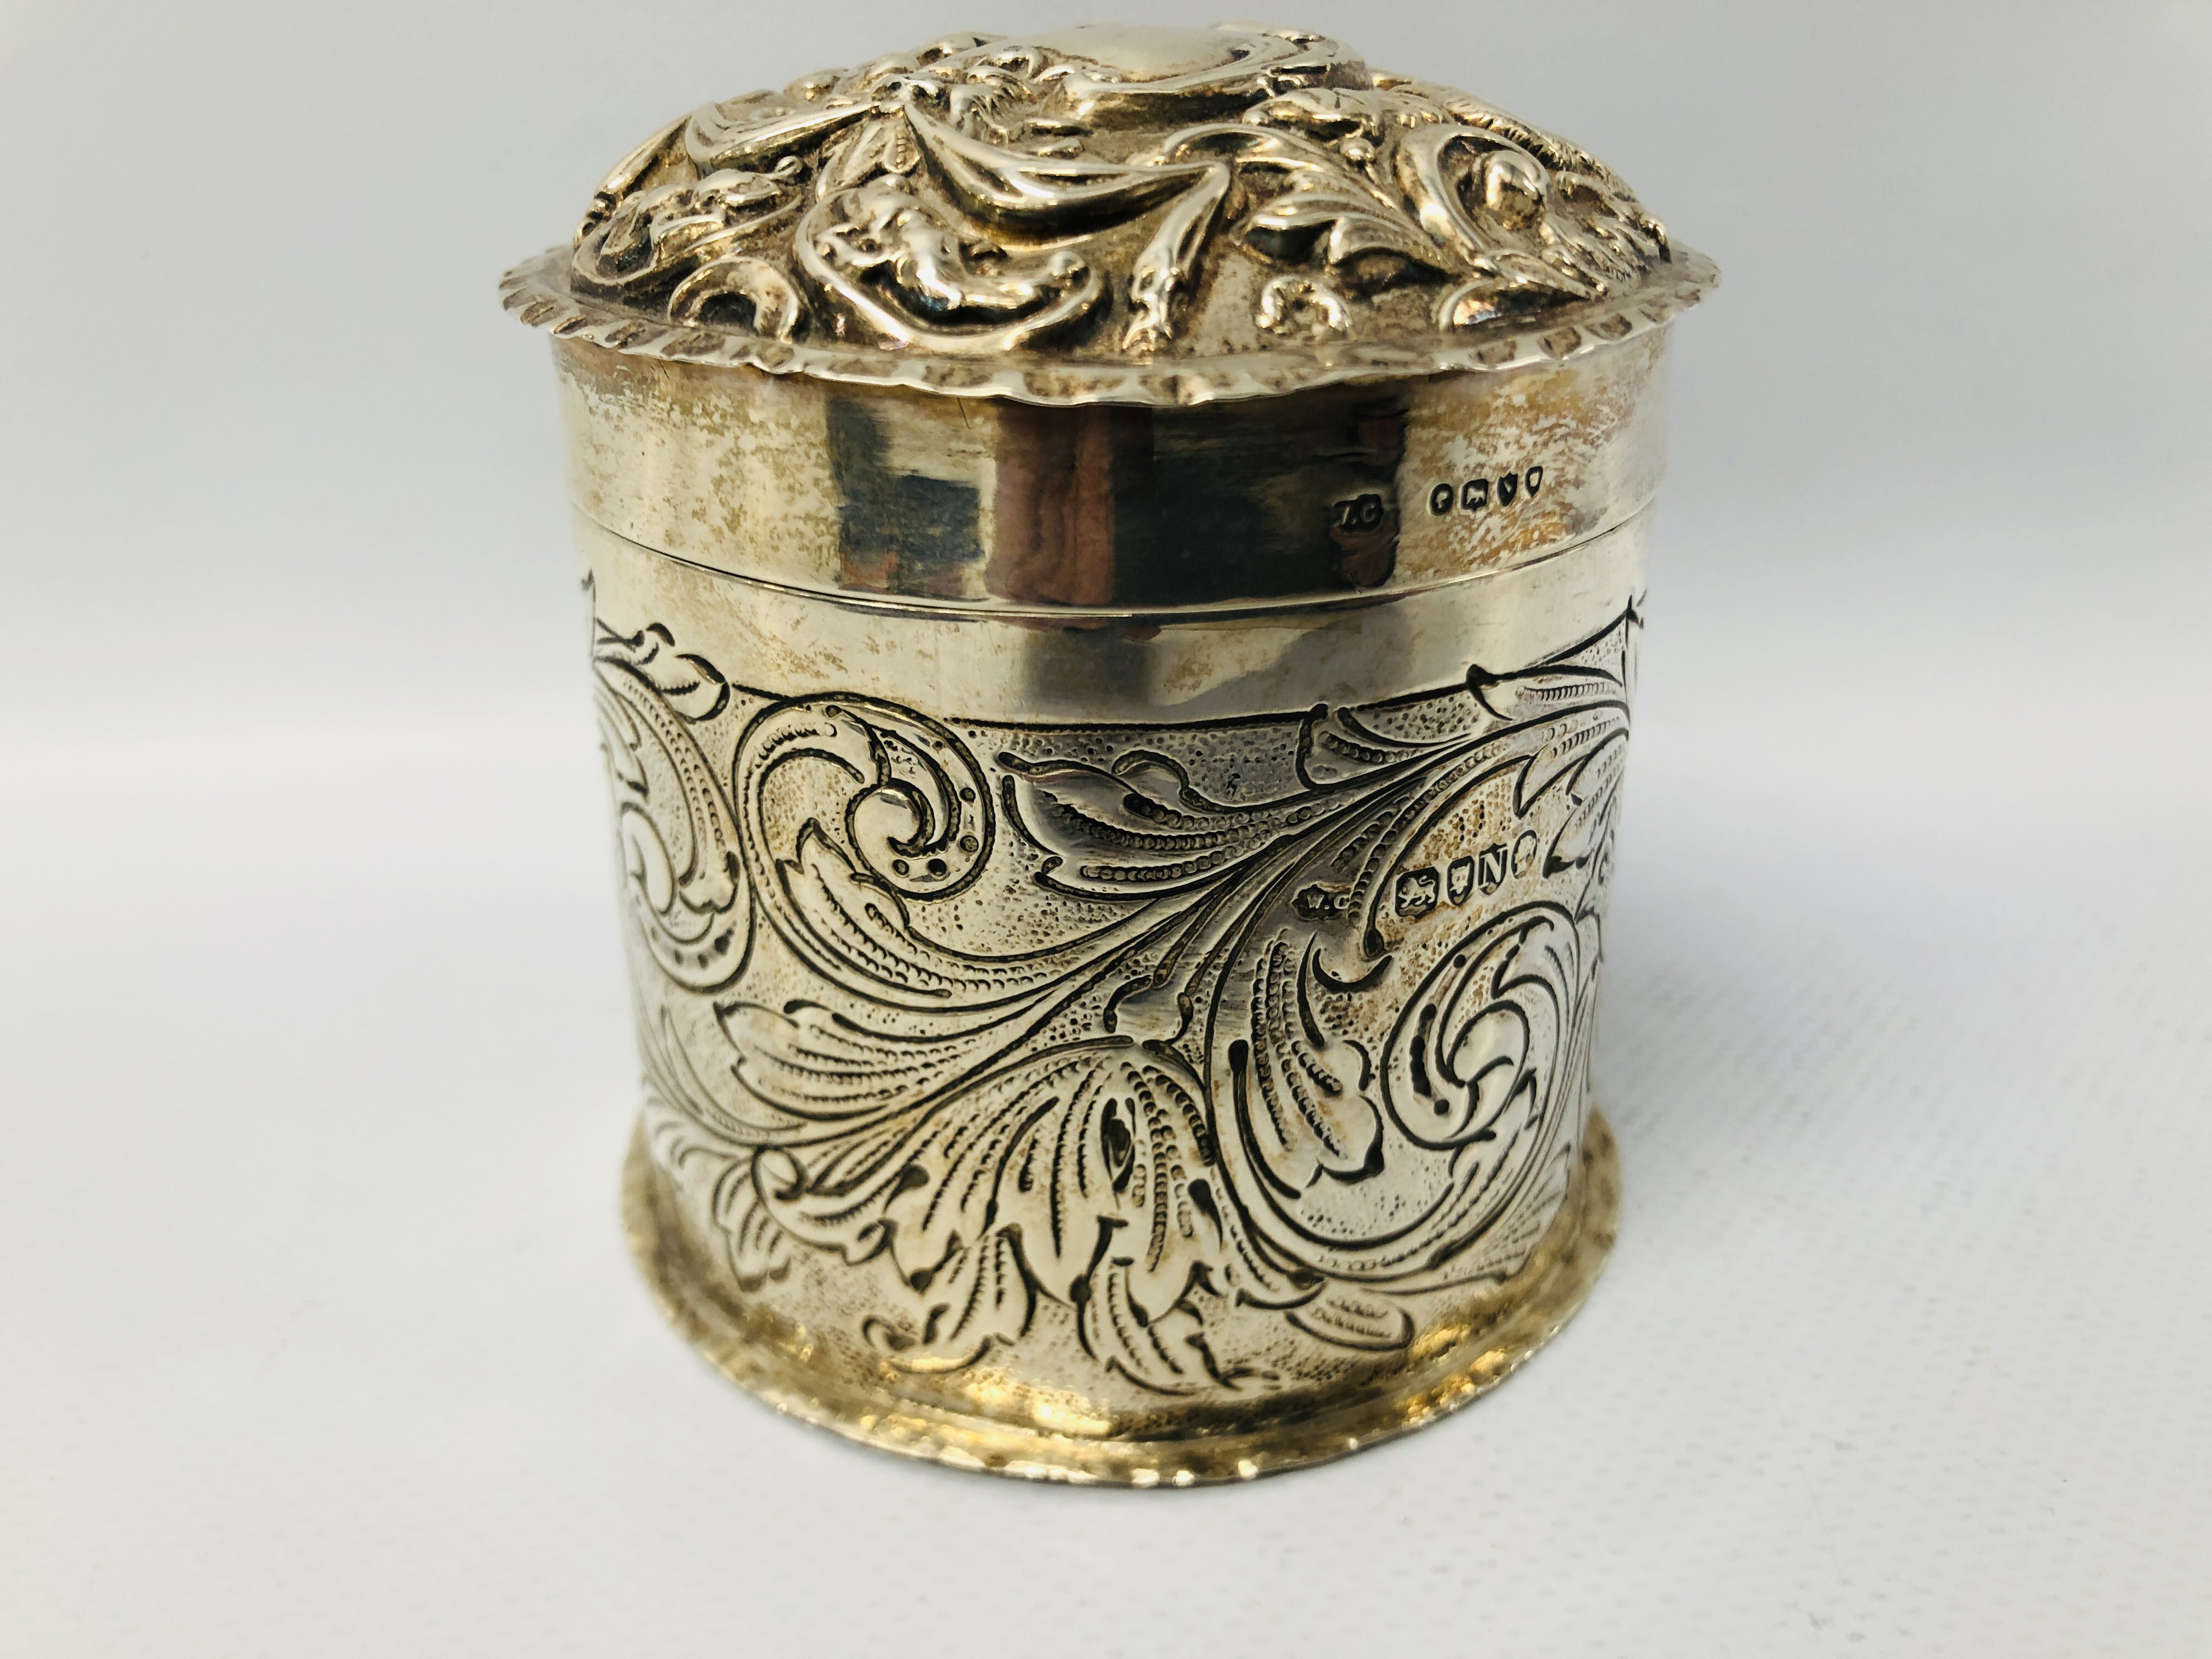 A VICTORIAN SILVER CYLINDRICAL BOX AND COVER DECORATED WITH BIRD LONDON 1888, WILLIAM COMINS - H 8. - Image 7 of 21